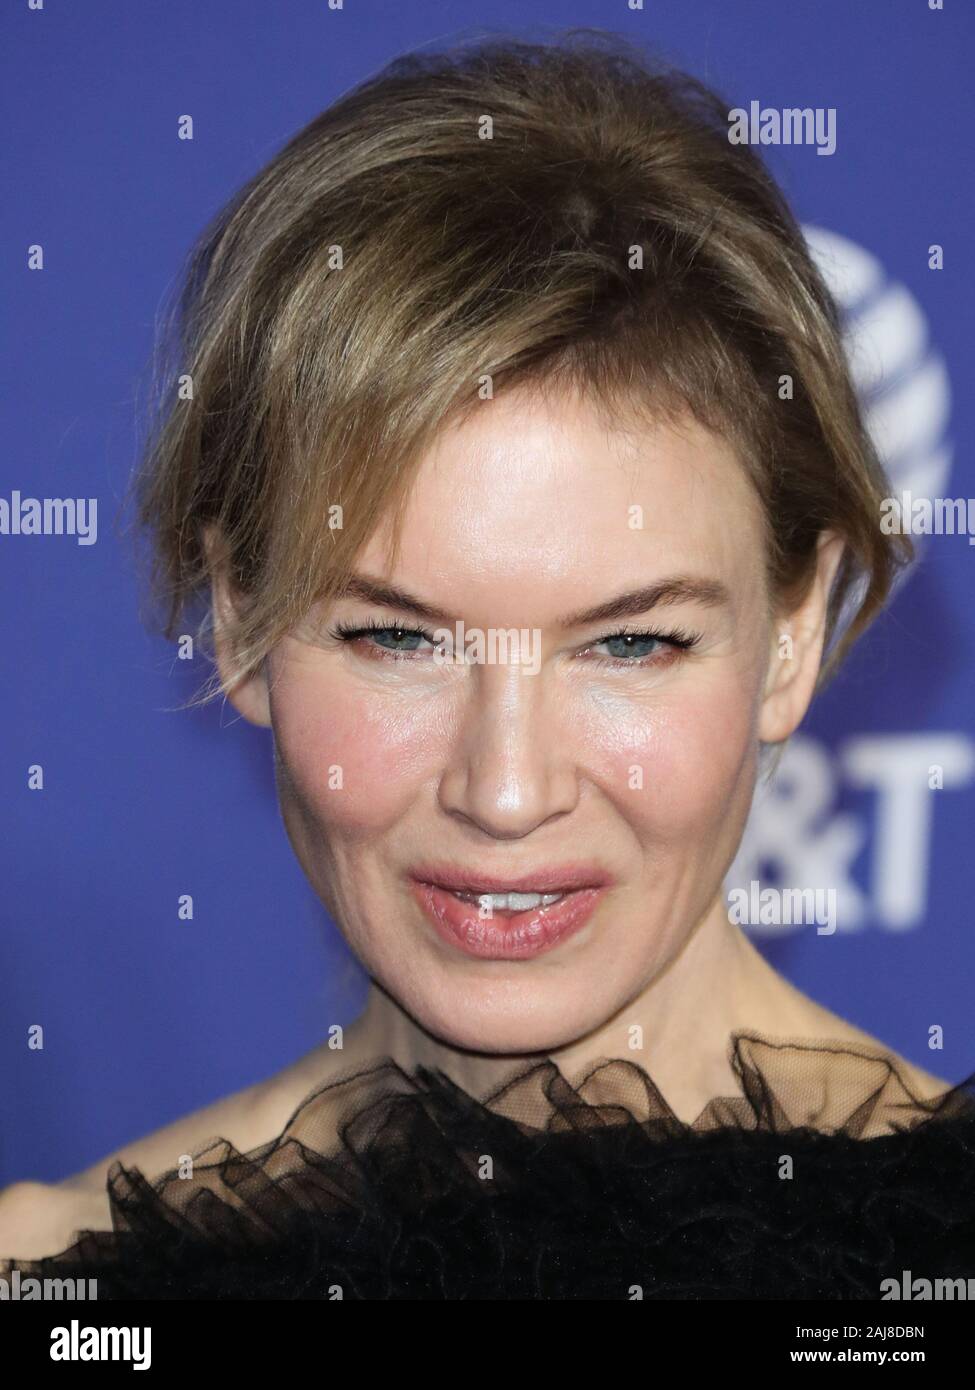 PALM SPRINGS, CALIFORNIA, USA - JANUARY 02: Actress Renee Zellweger wearing Jason Wu Collection arrives at the 31st Annual Palm Springs International Film Festival Awards Gala held at the Palm Springs Convention Center on January 2, 2020 in Palm Springs, California, United States. (Photo by Xavier Collin/Image Press Agency) Stock Photo